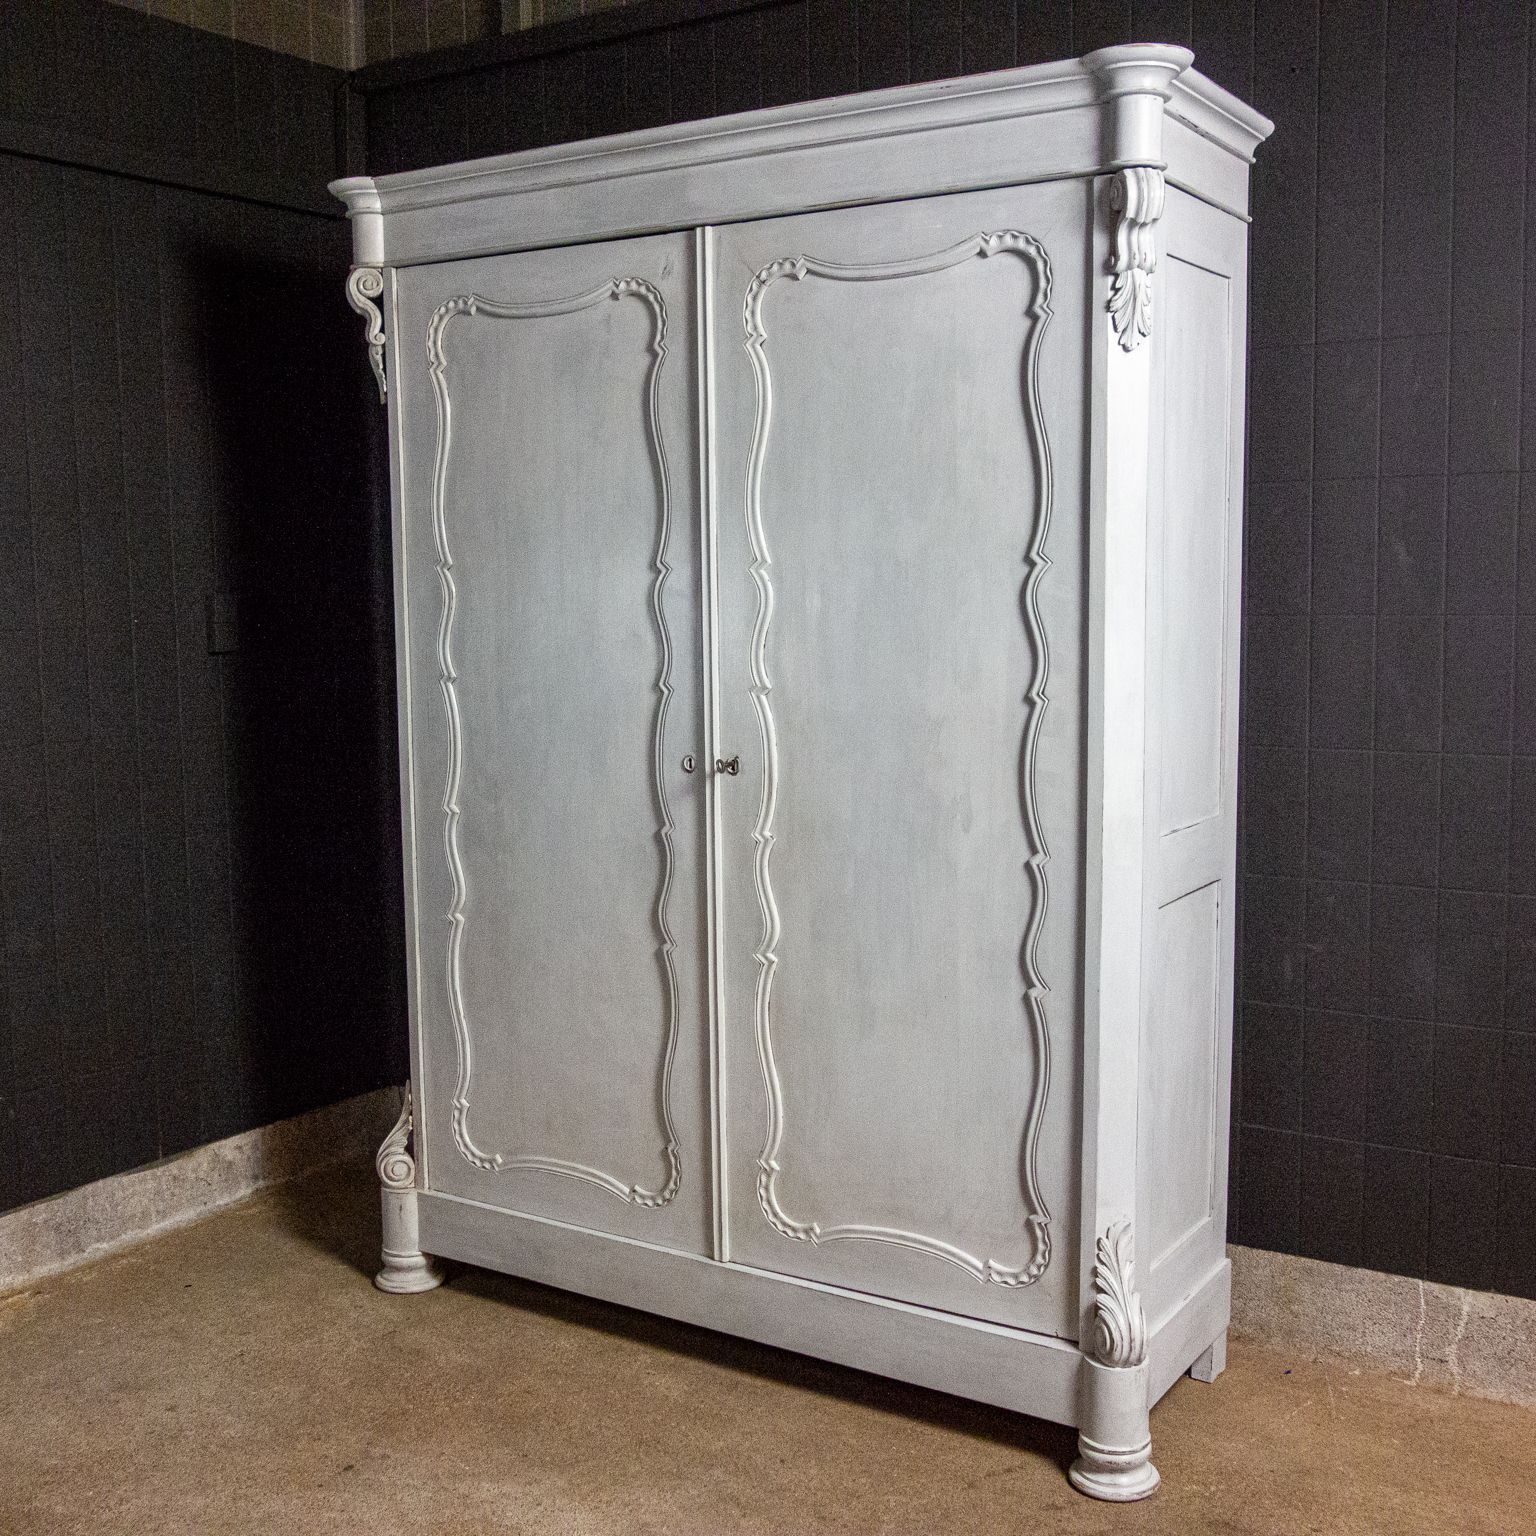 Antique White Wardrobe – Curated Collection | Vinterior Inside White Antique Wardrobes (View 15 of 15)